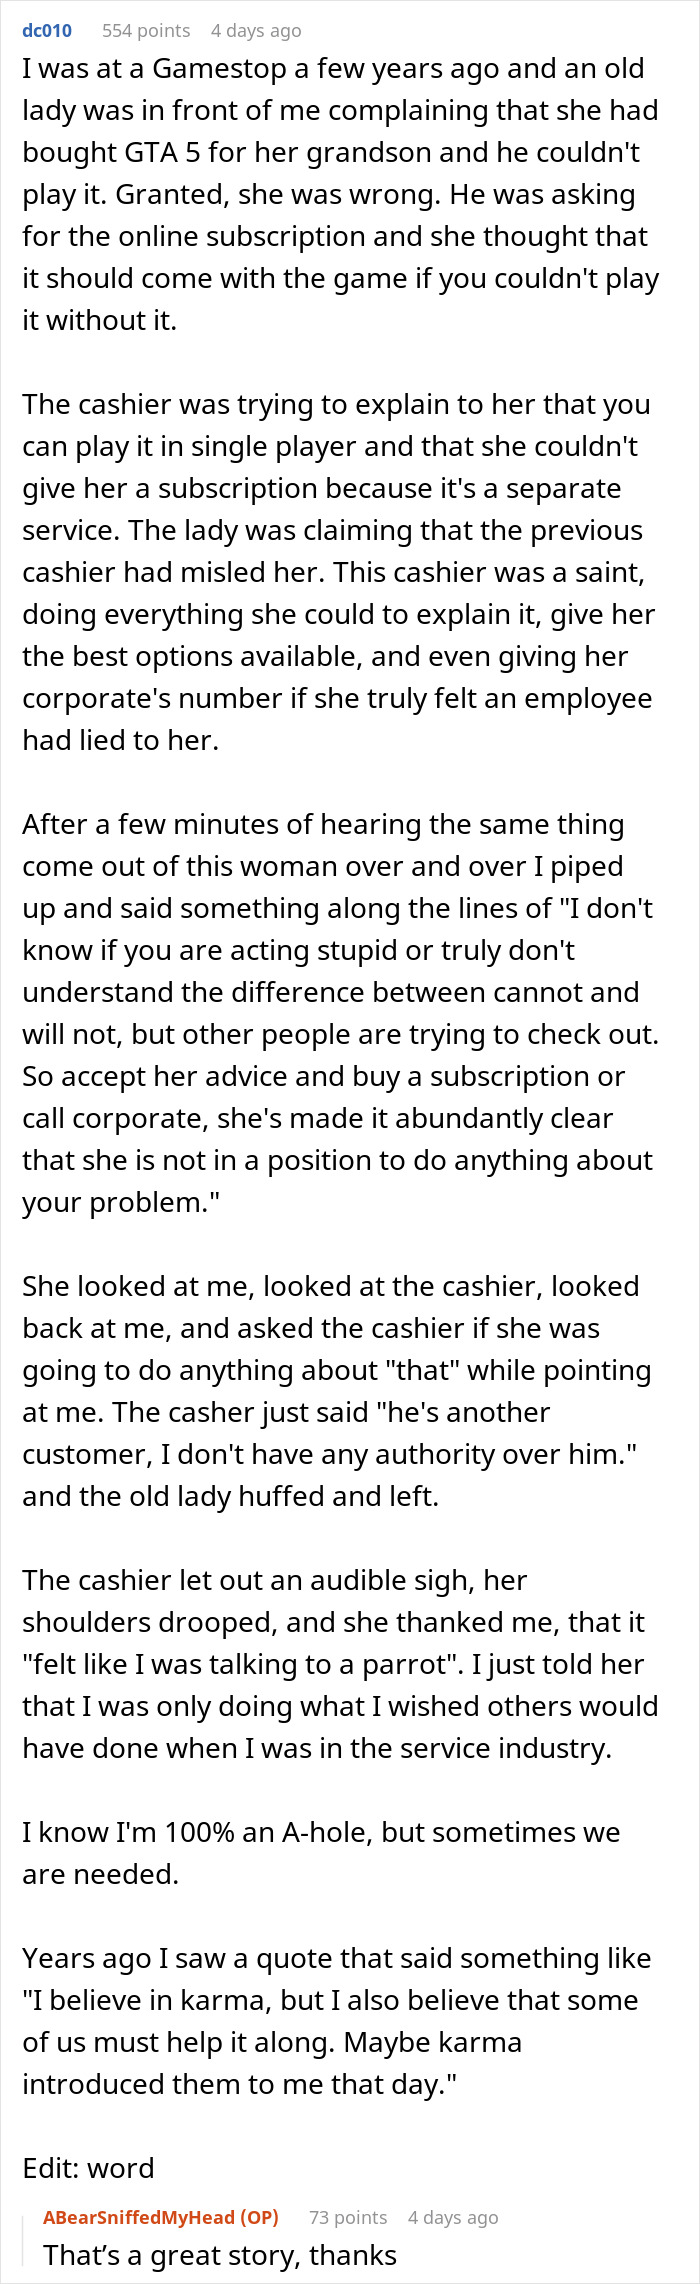 Man Finds Out That Him Taking A Karen Customer’s Cart Away Because She Disrespected A Walmart Employee Became Folklore At The Store